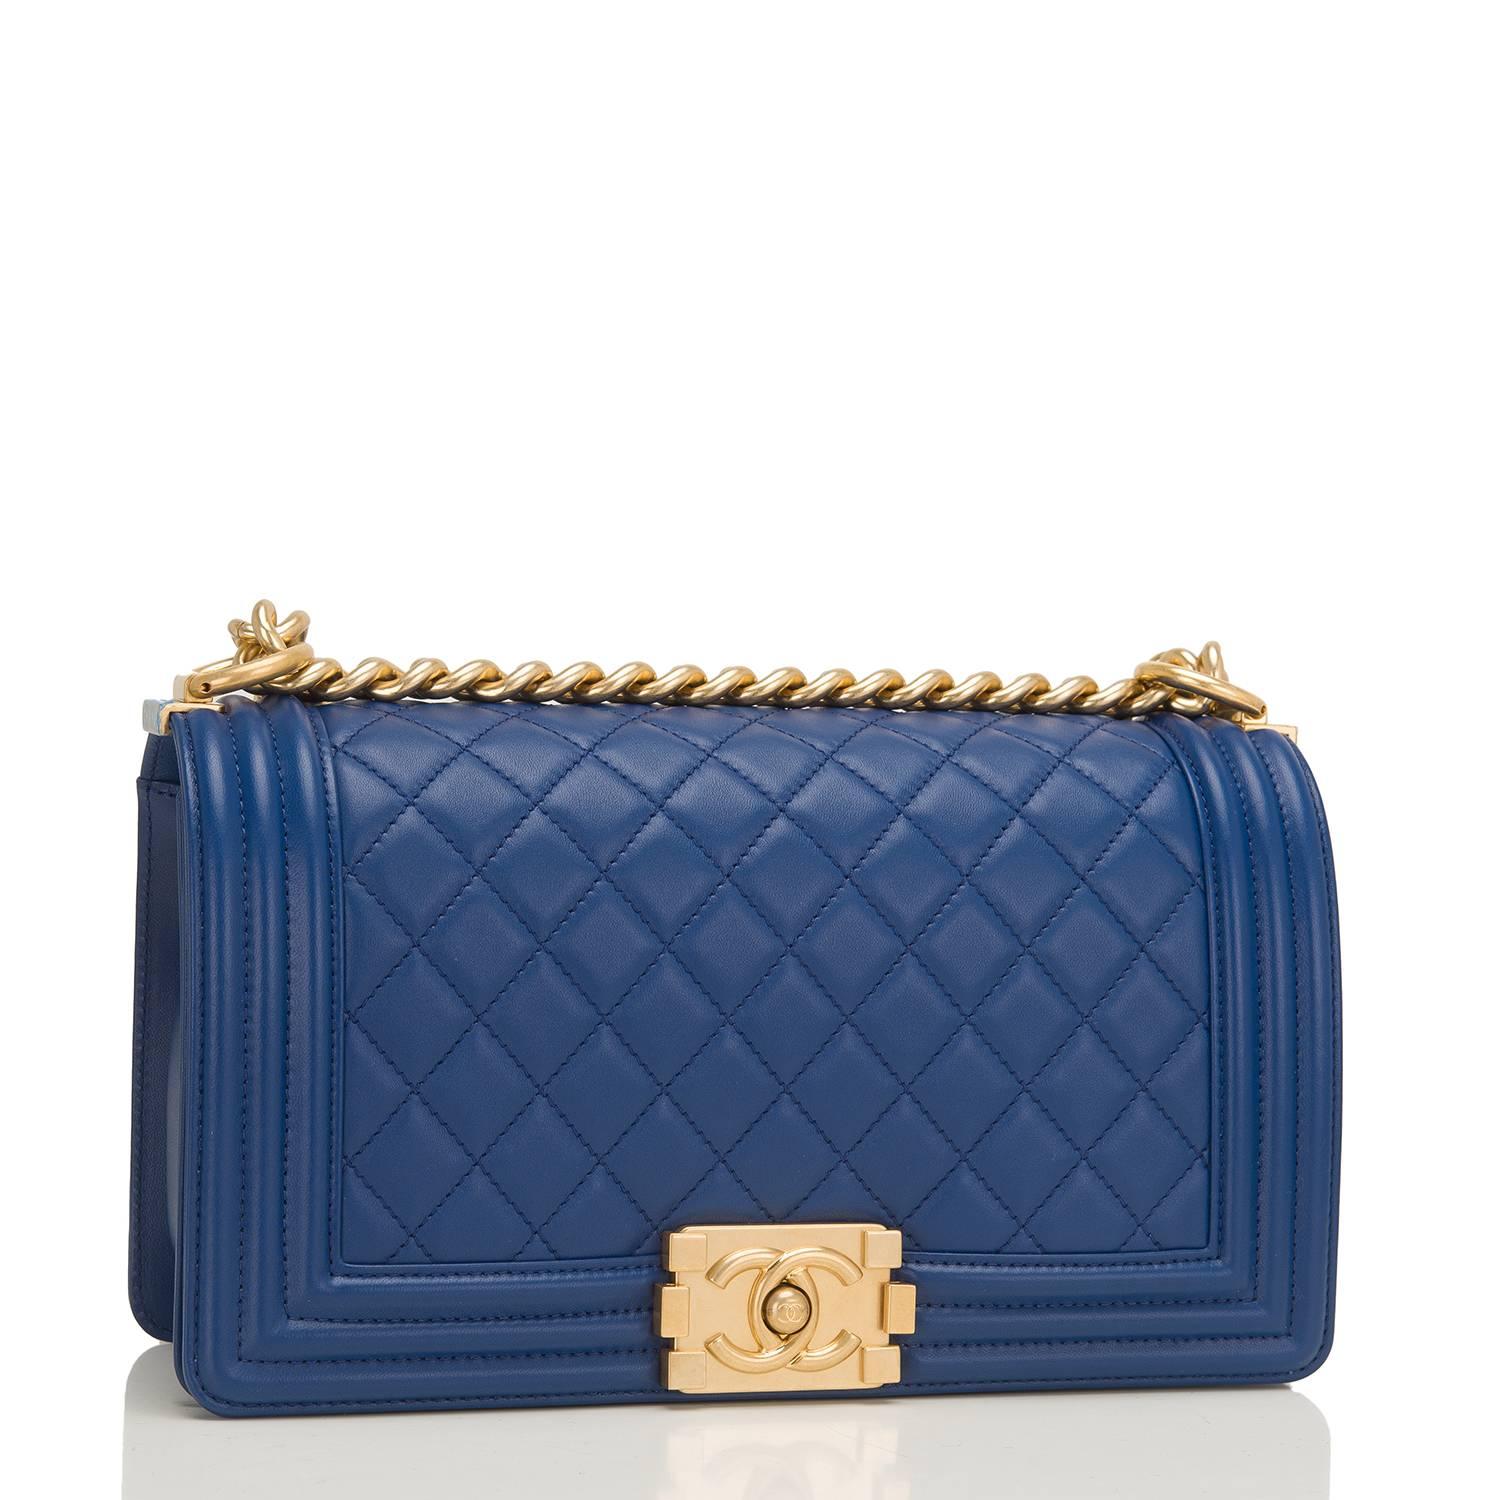 Chanel Old Medium Boy bag of dark blue quilted lambskin and gold hardware.

This Chanel bag is in the classic Boy style with a full front flap with the Boy signature CC push lock closure detail and gold chain link and dark blue leather padded